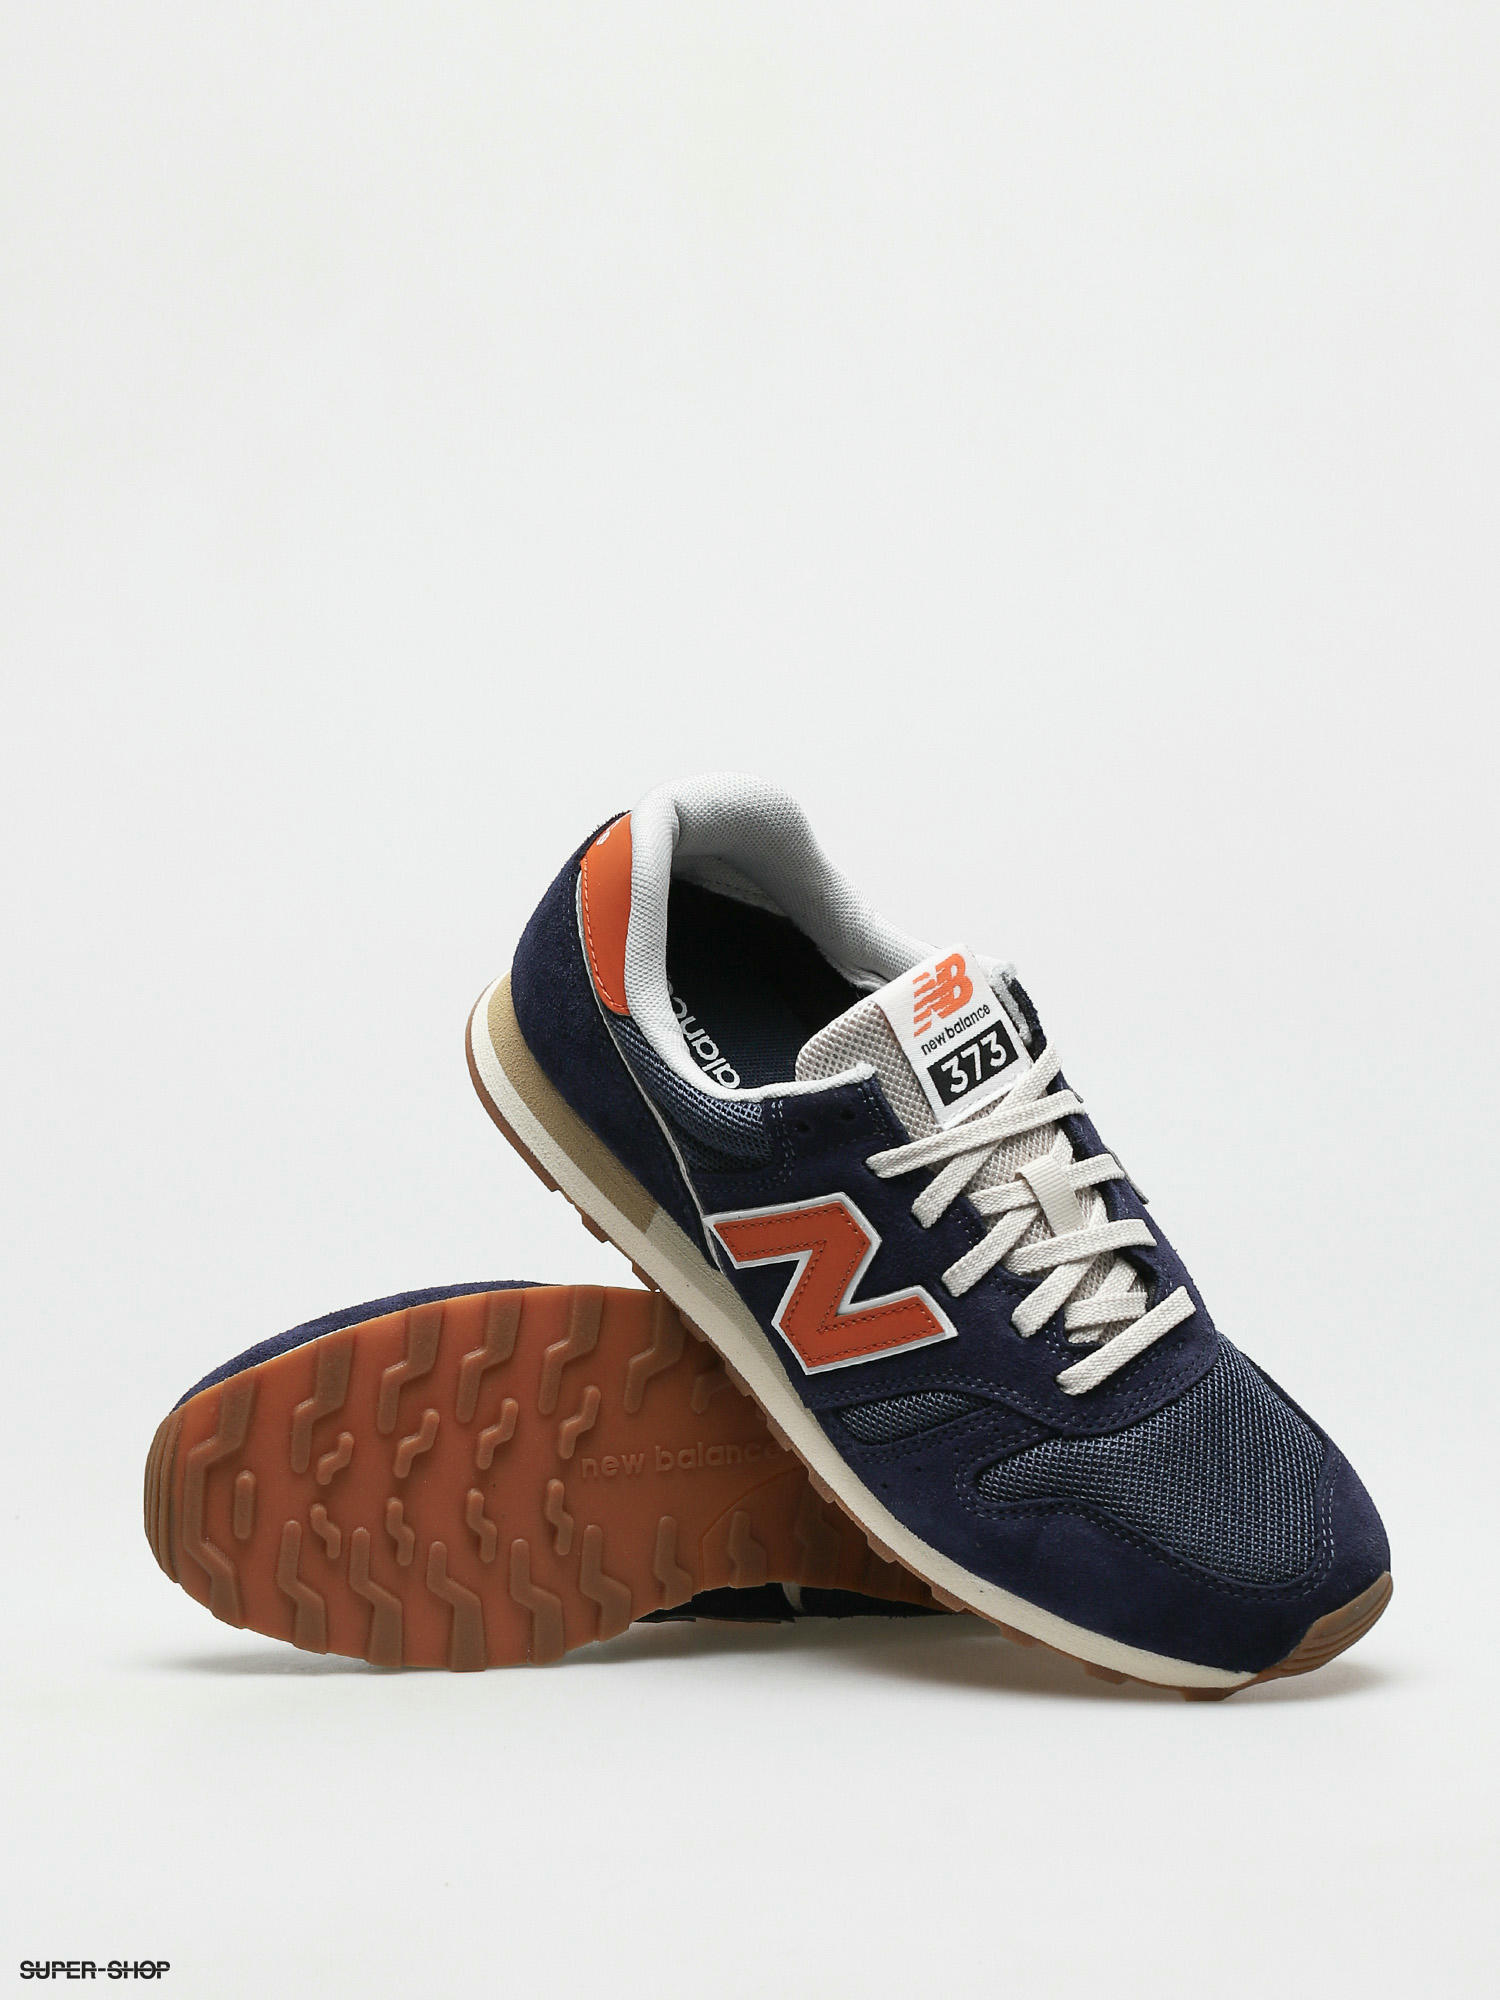 NEW BALANCE - Women's 373 sneakers - GH-Stores.com